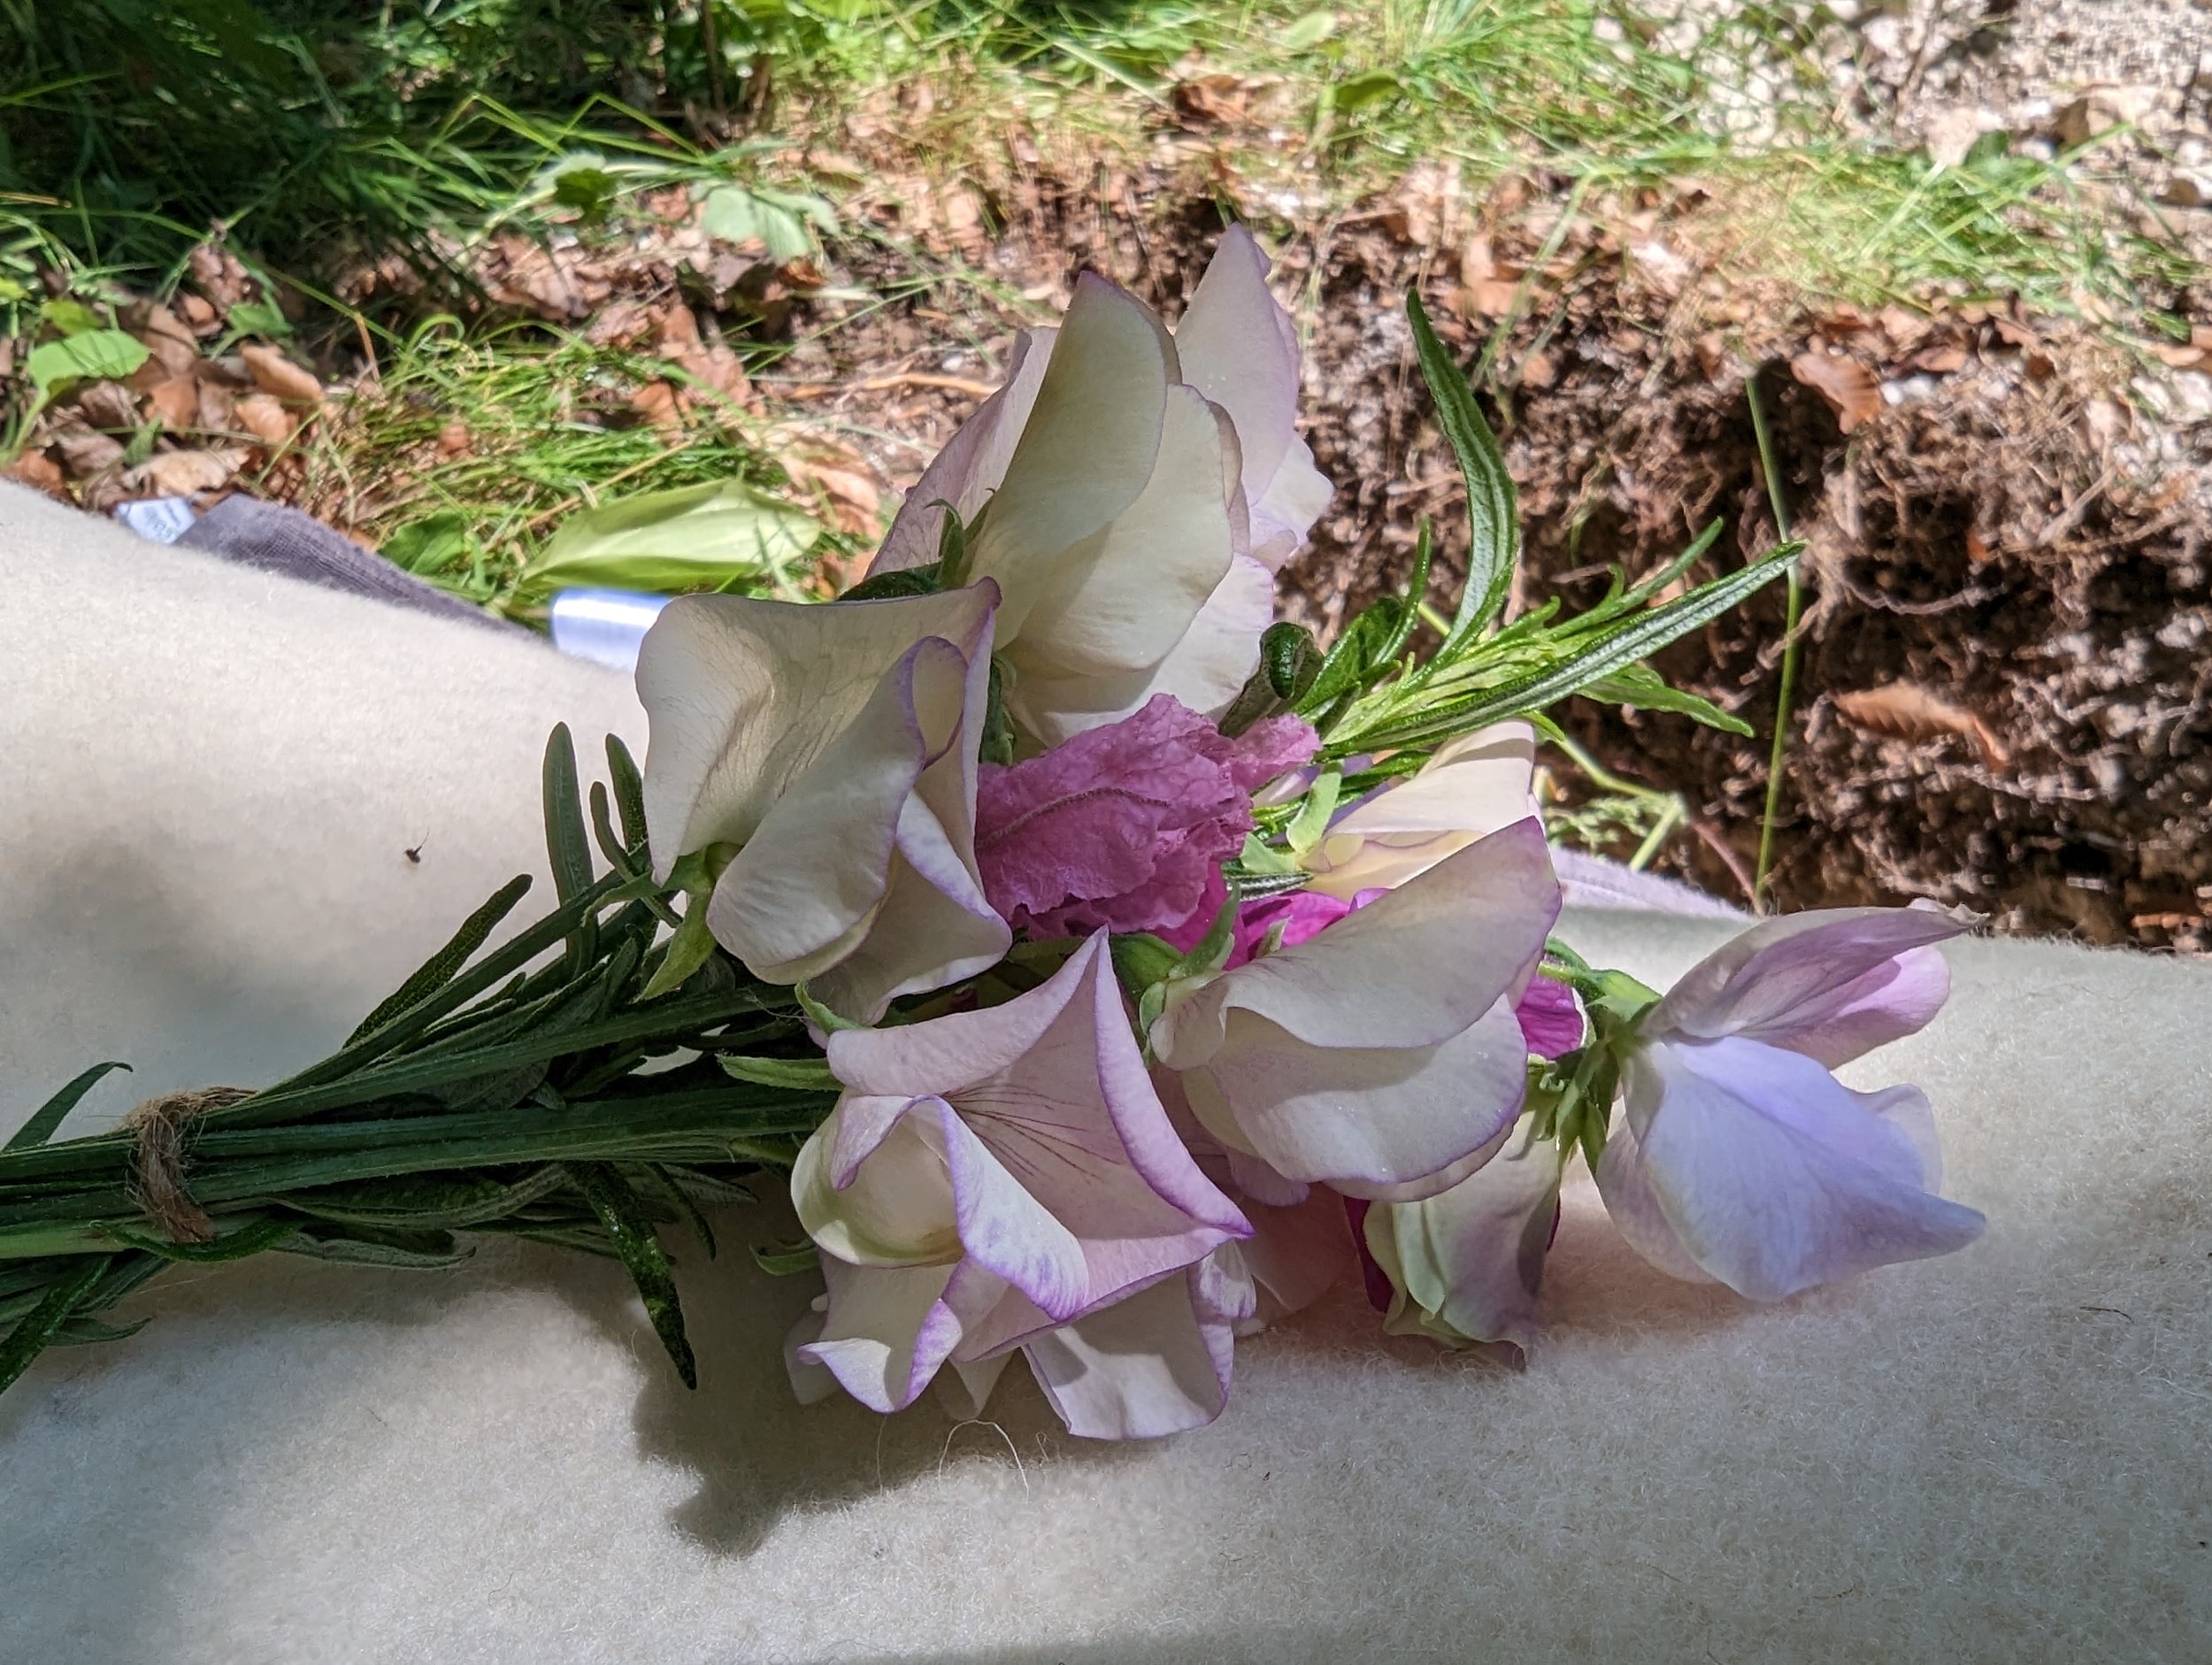 Swans wing burial with flowers.jpg